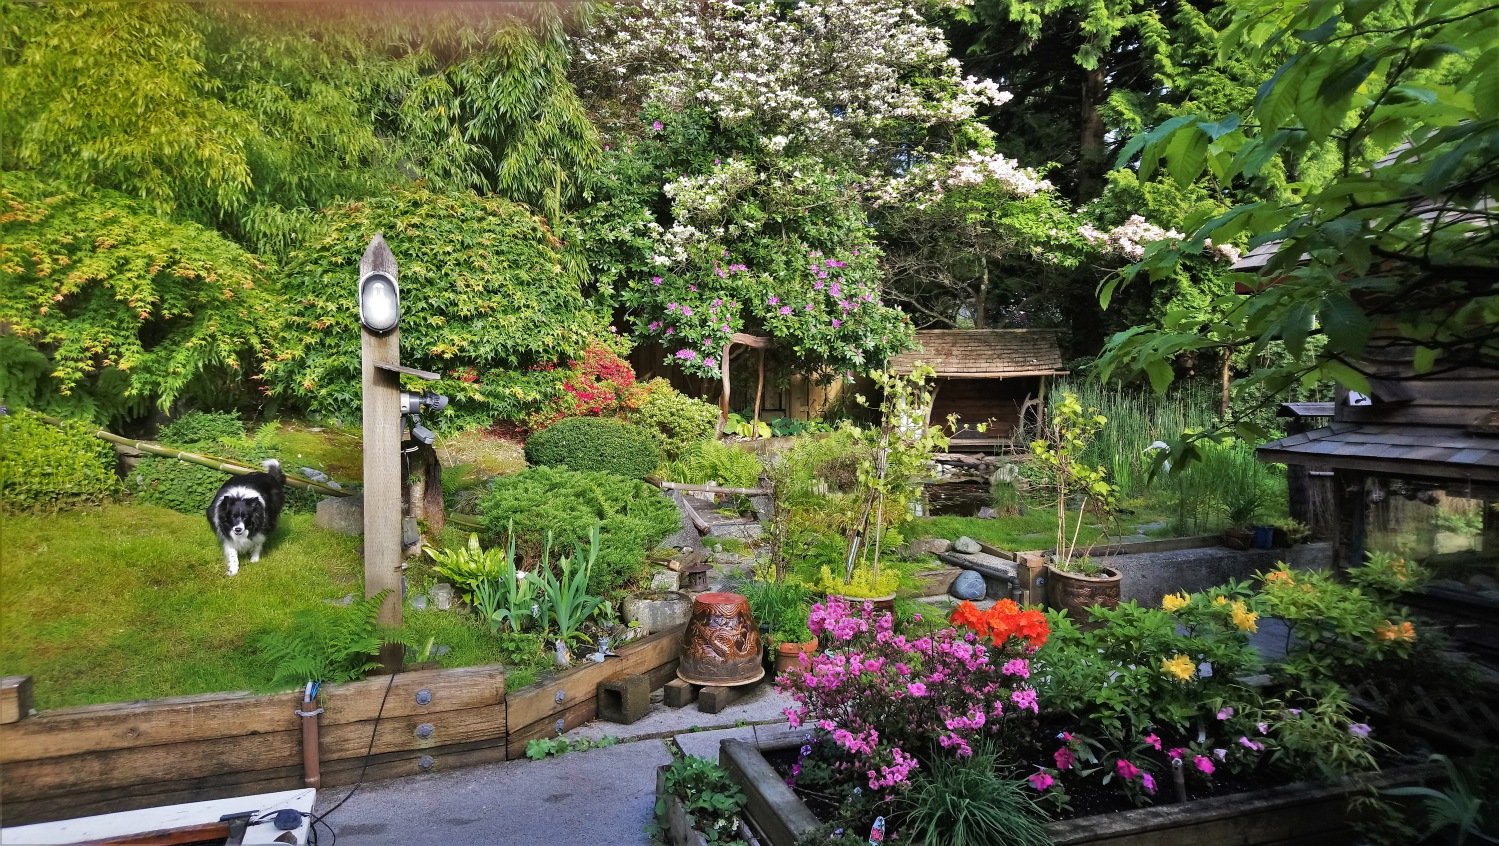 Ken's backyard garden with many shrubs and a koi fish pond.